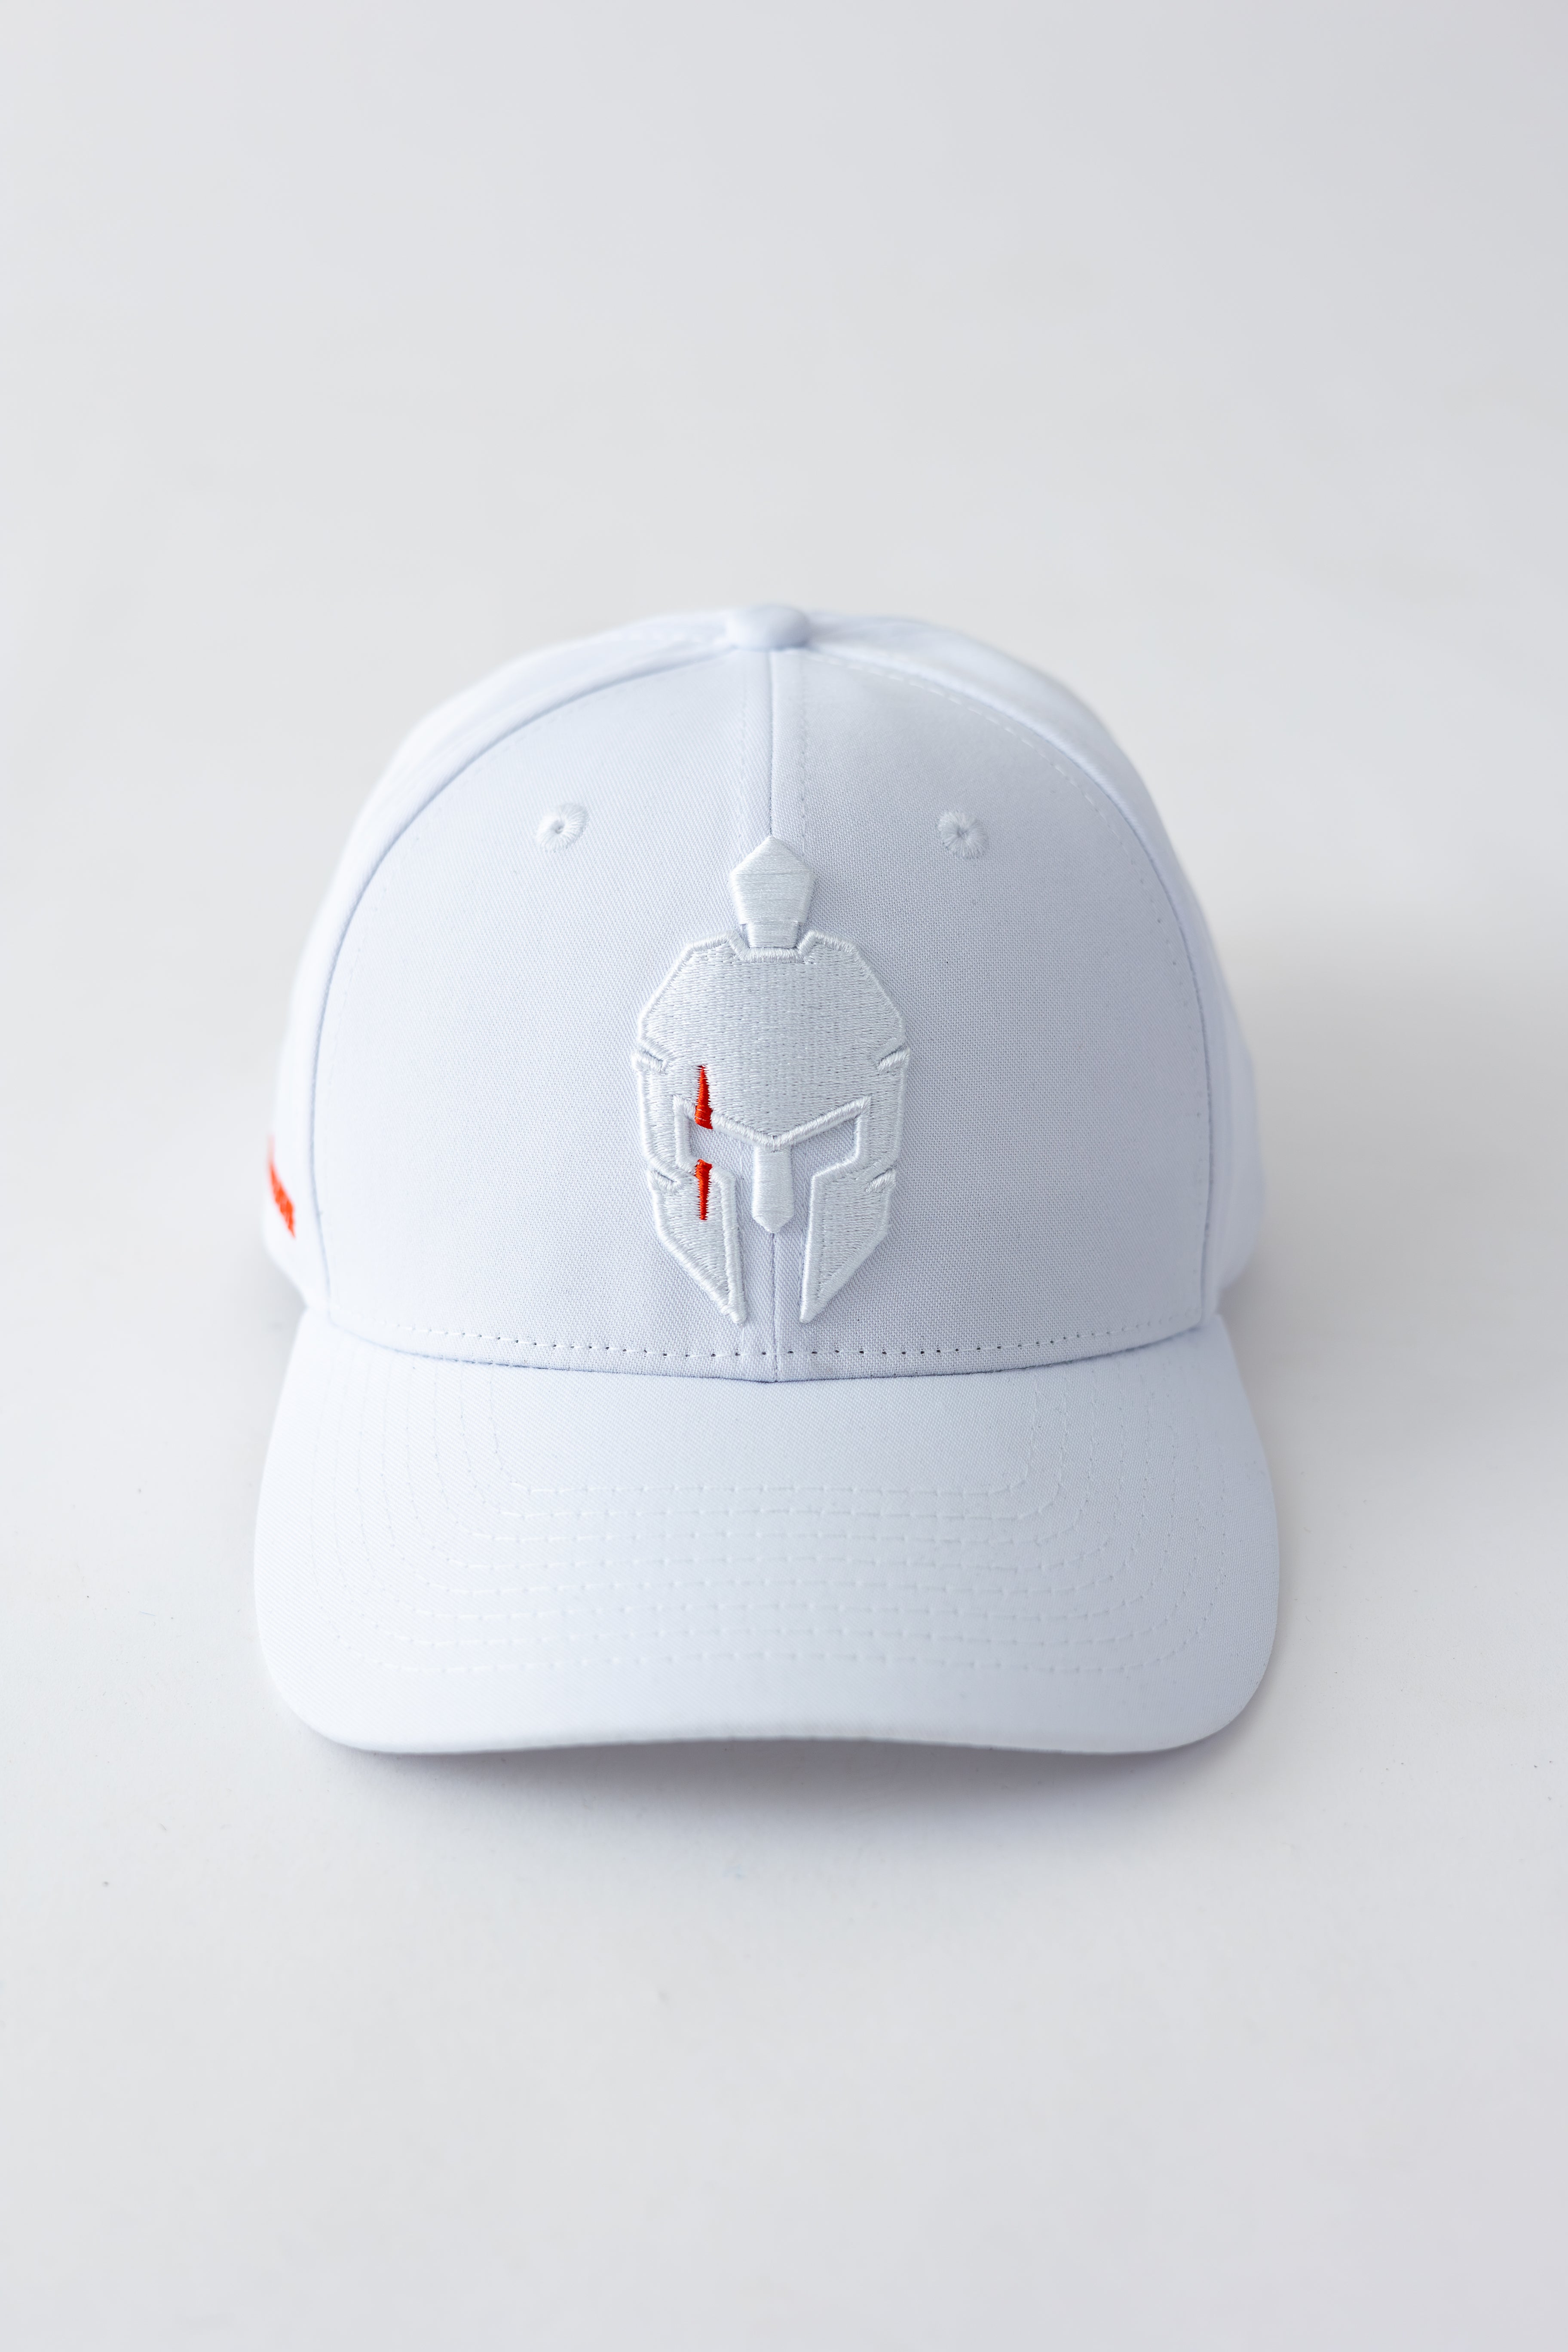 white hat with embroidered white helmet logo on front sitting on white background